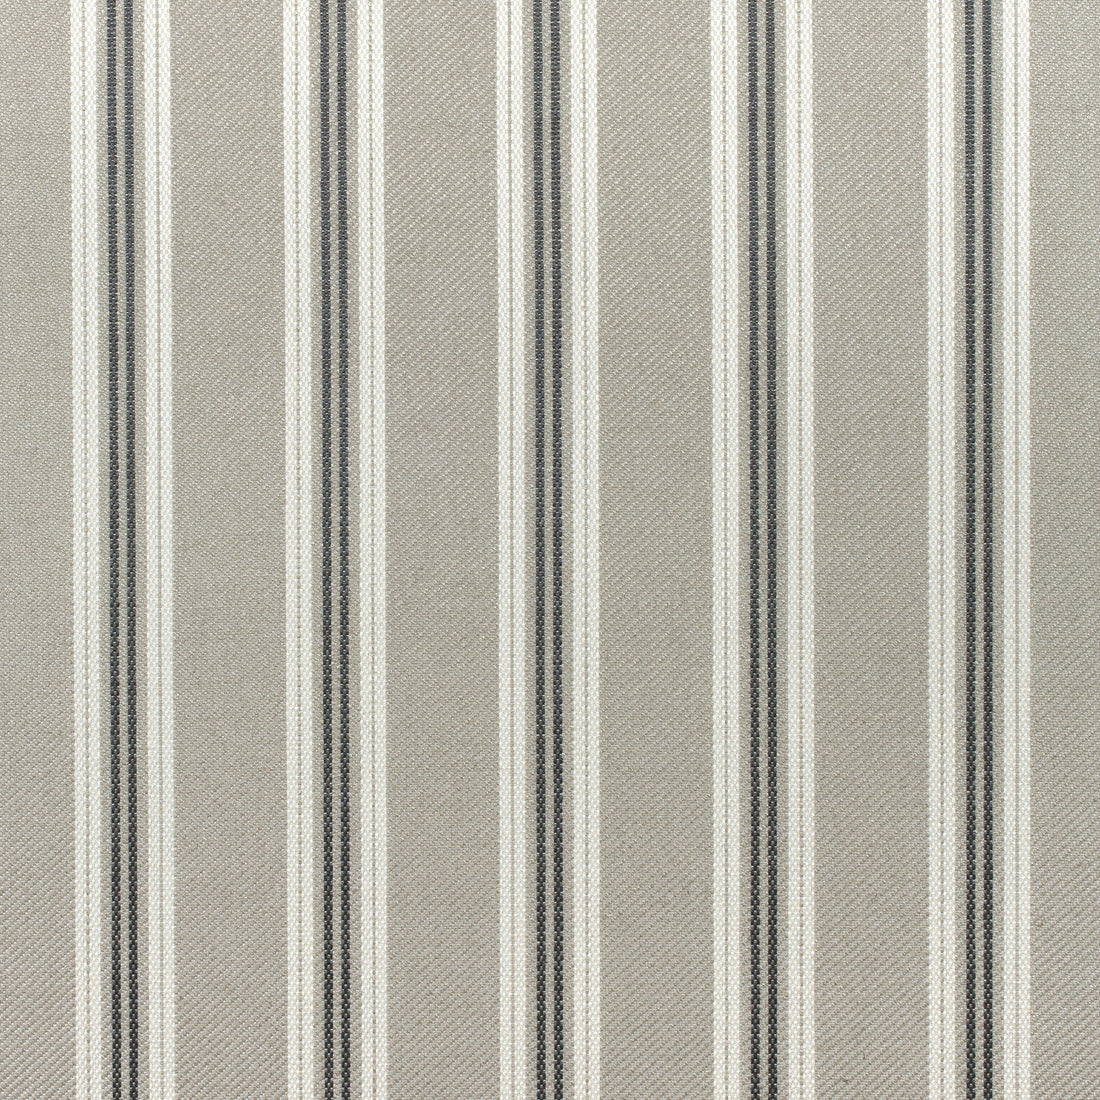 Colonnade Stripe fabric in charcoal color - pattern number W80738 - by Thibaut in the Woven Resource 11: Rialto collection